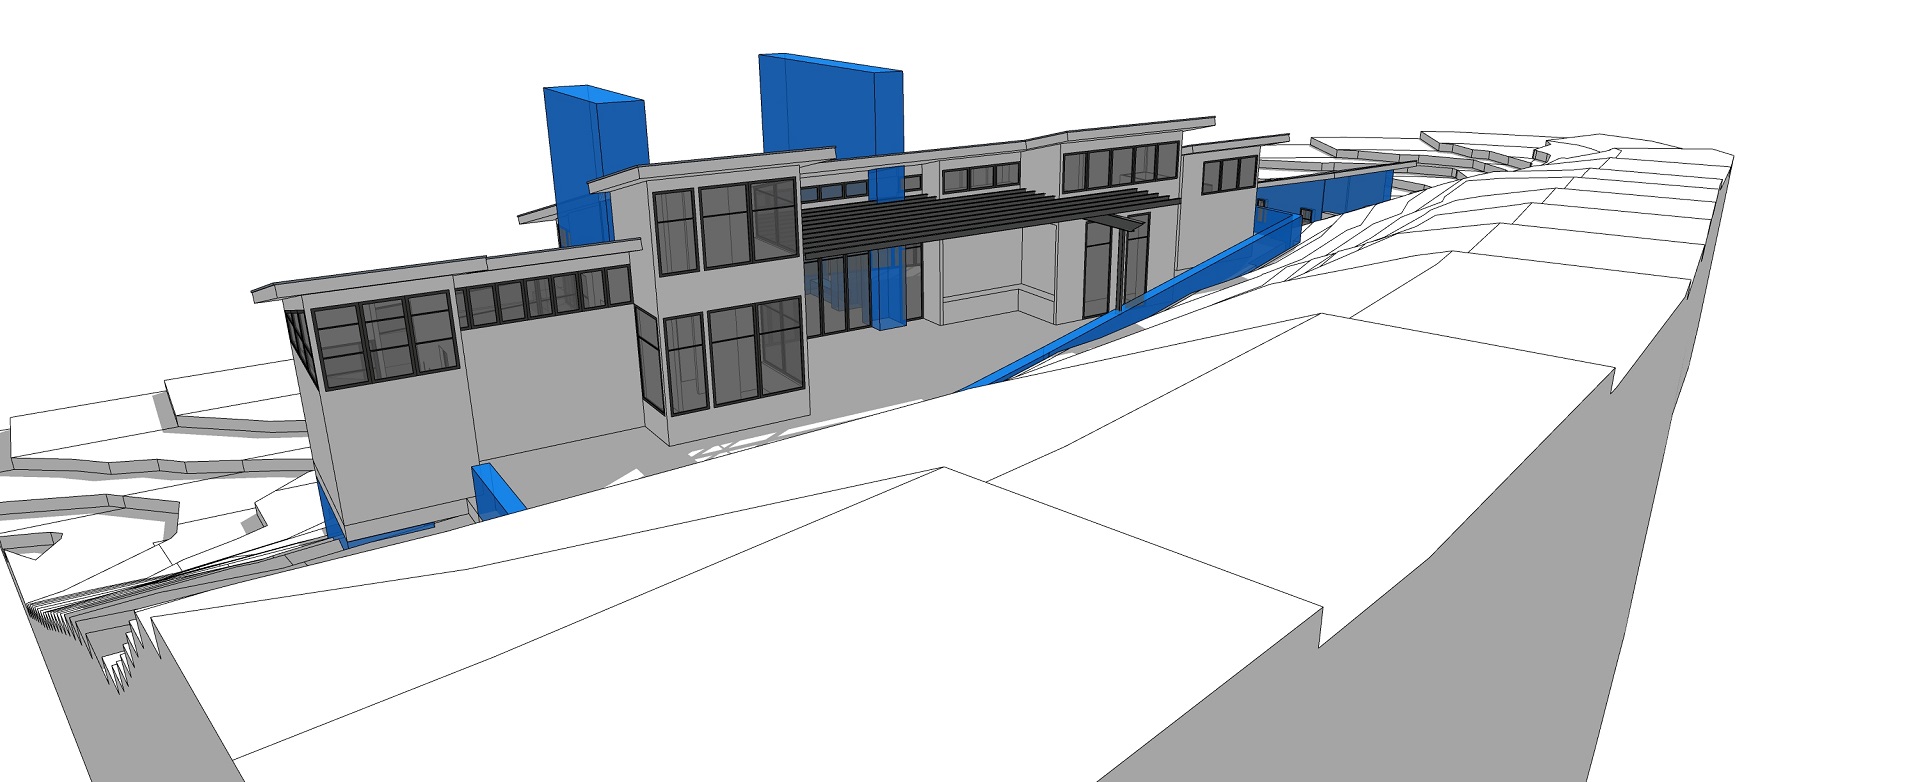 Sketchup View of the Building